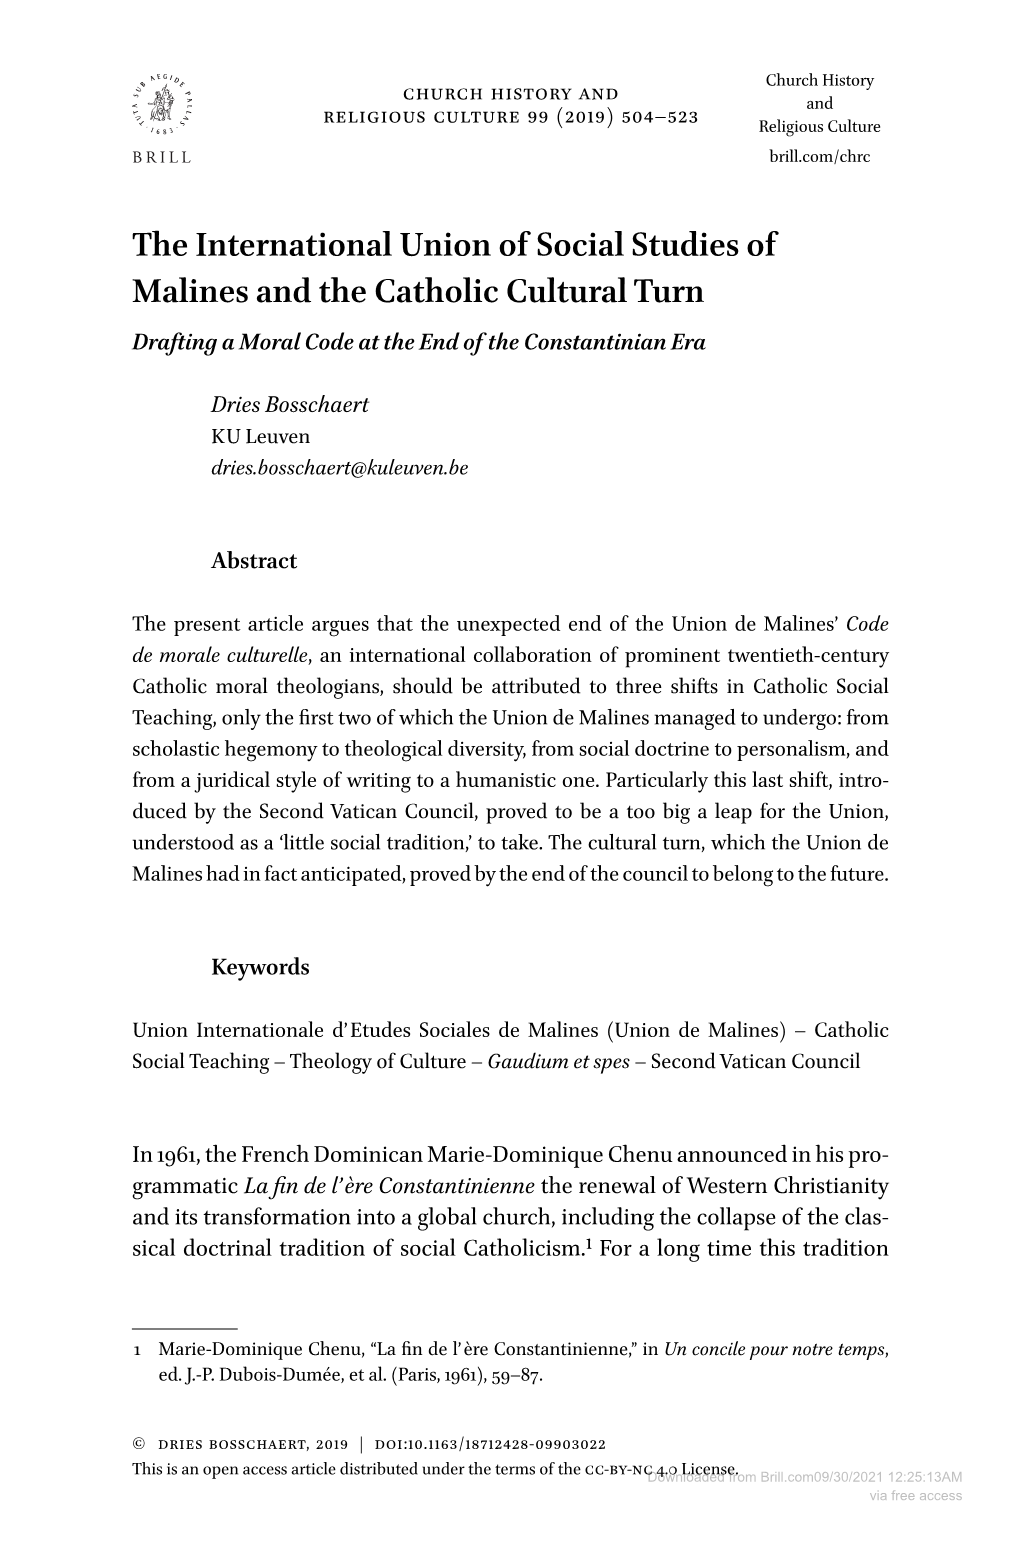 The International Union of Social Studies of Malines and the Catholic Cultural Turn Drafting a Moral Code at the End of the Constantinian Era